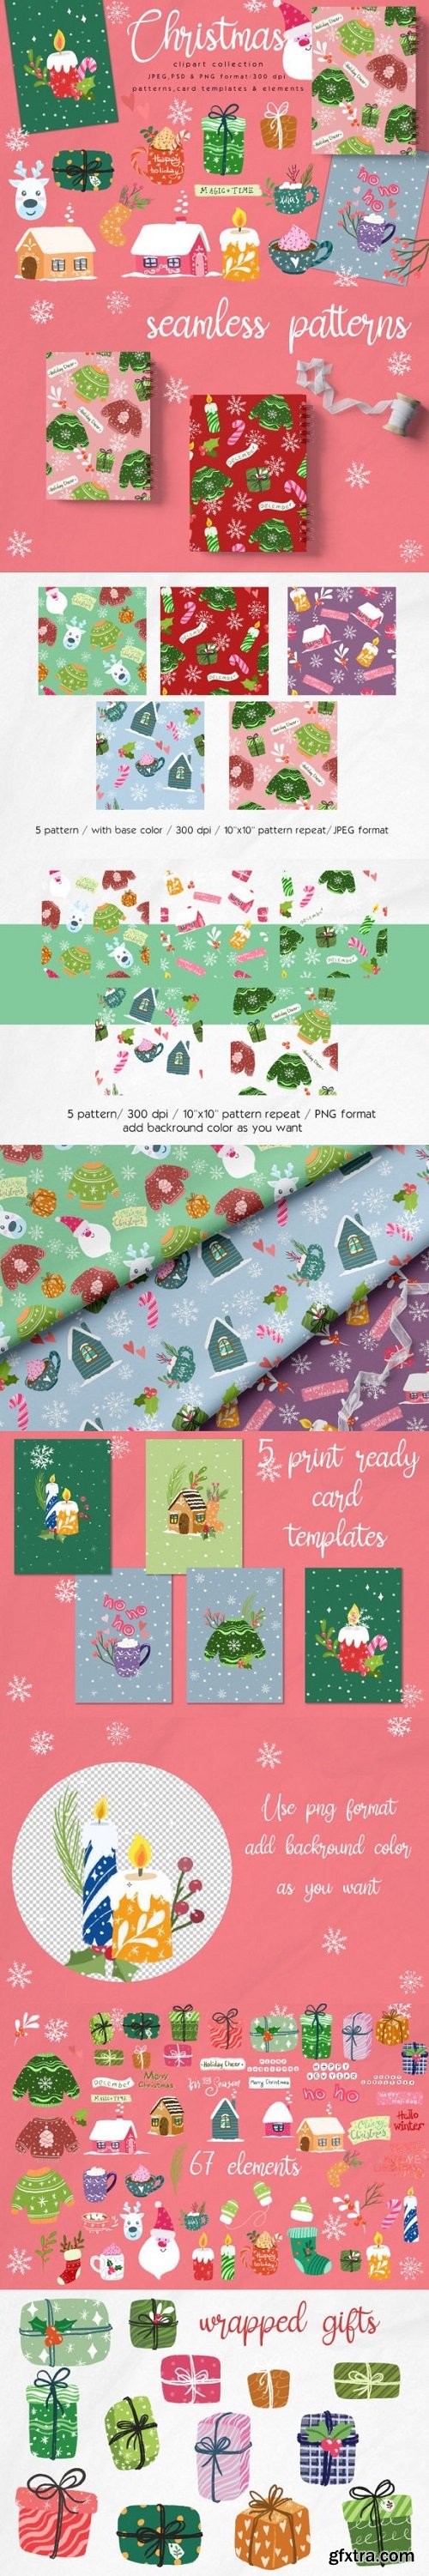 Christmas Pattern, Card, Elements Pack